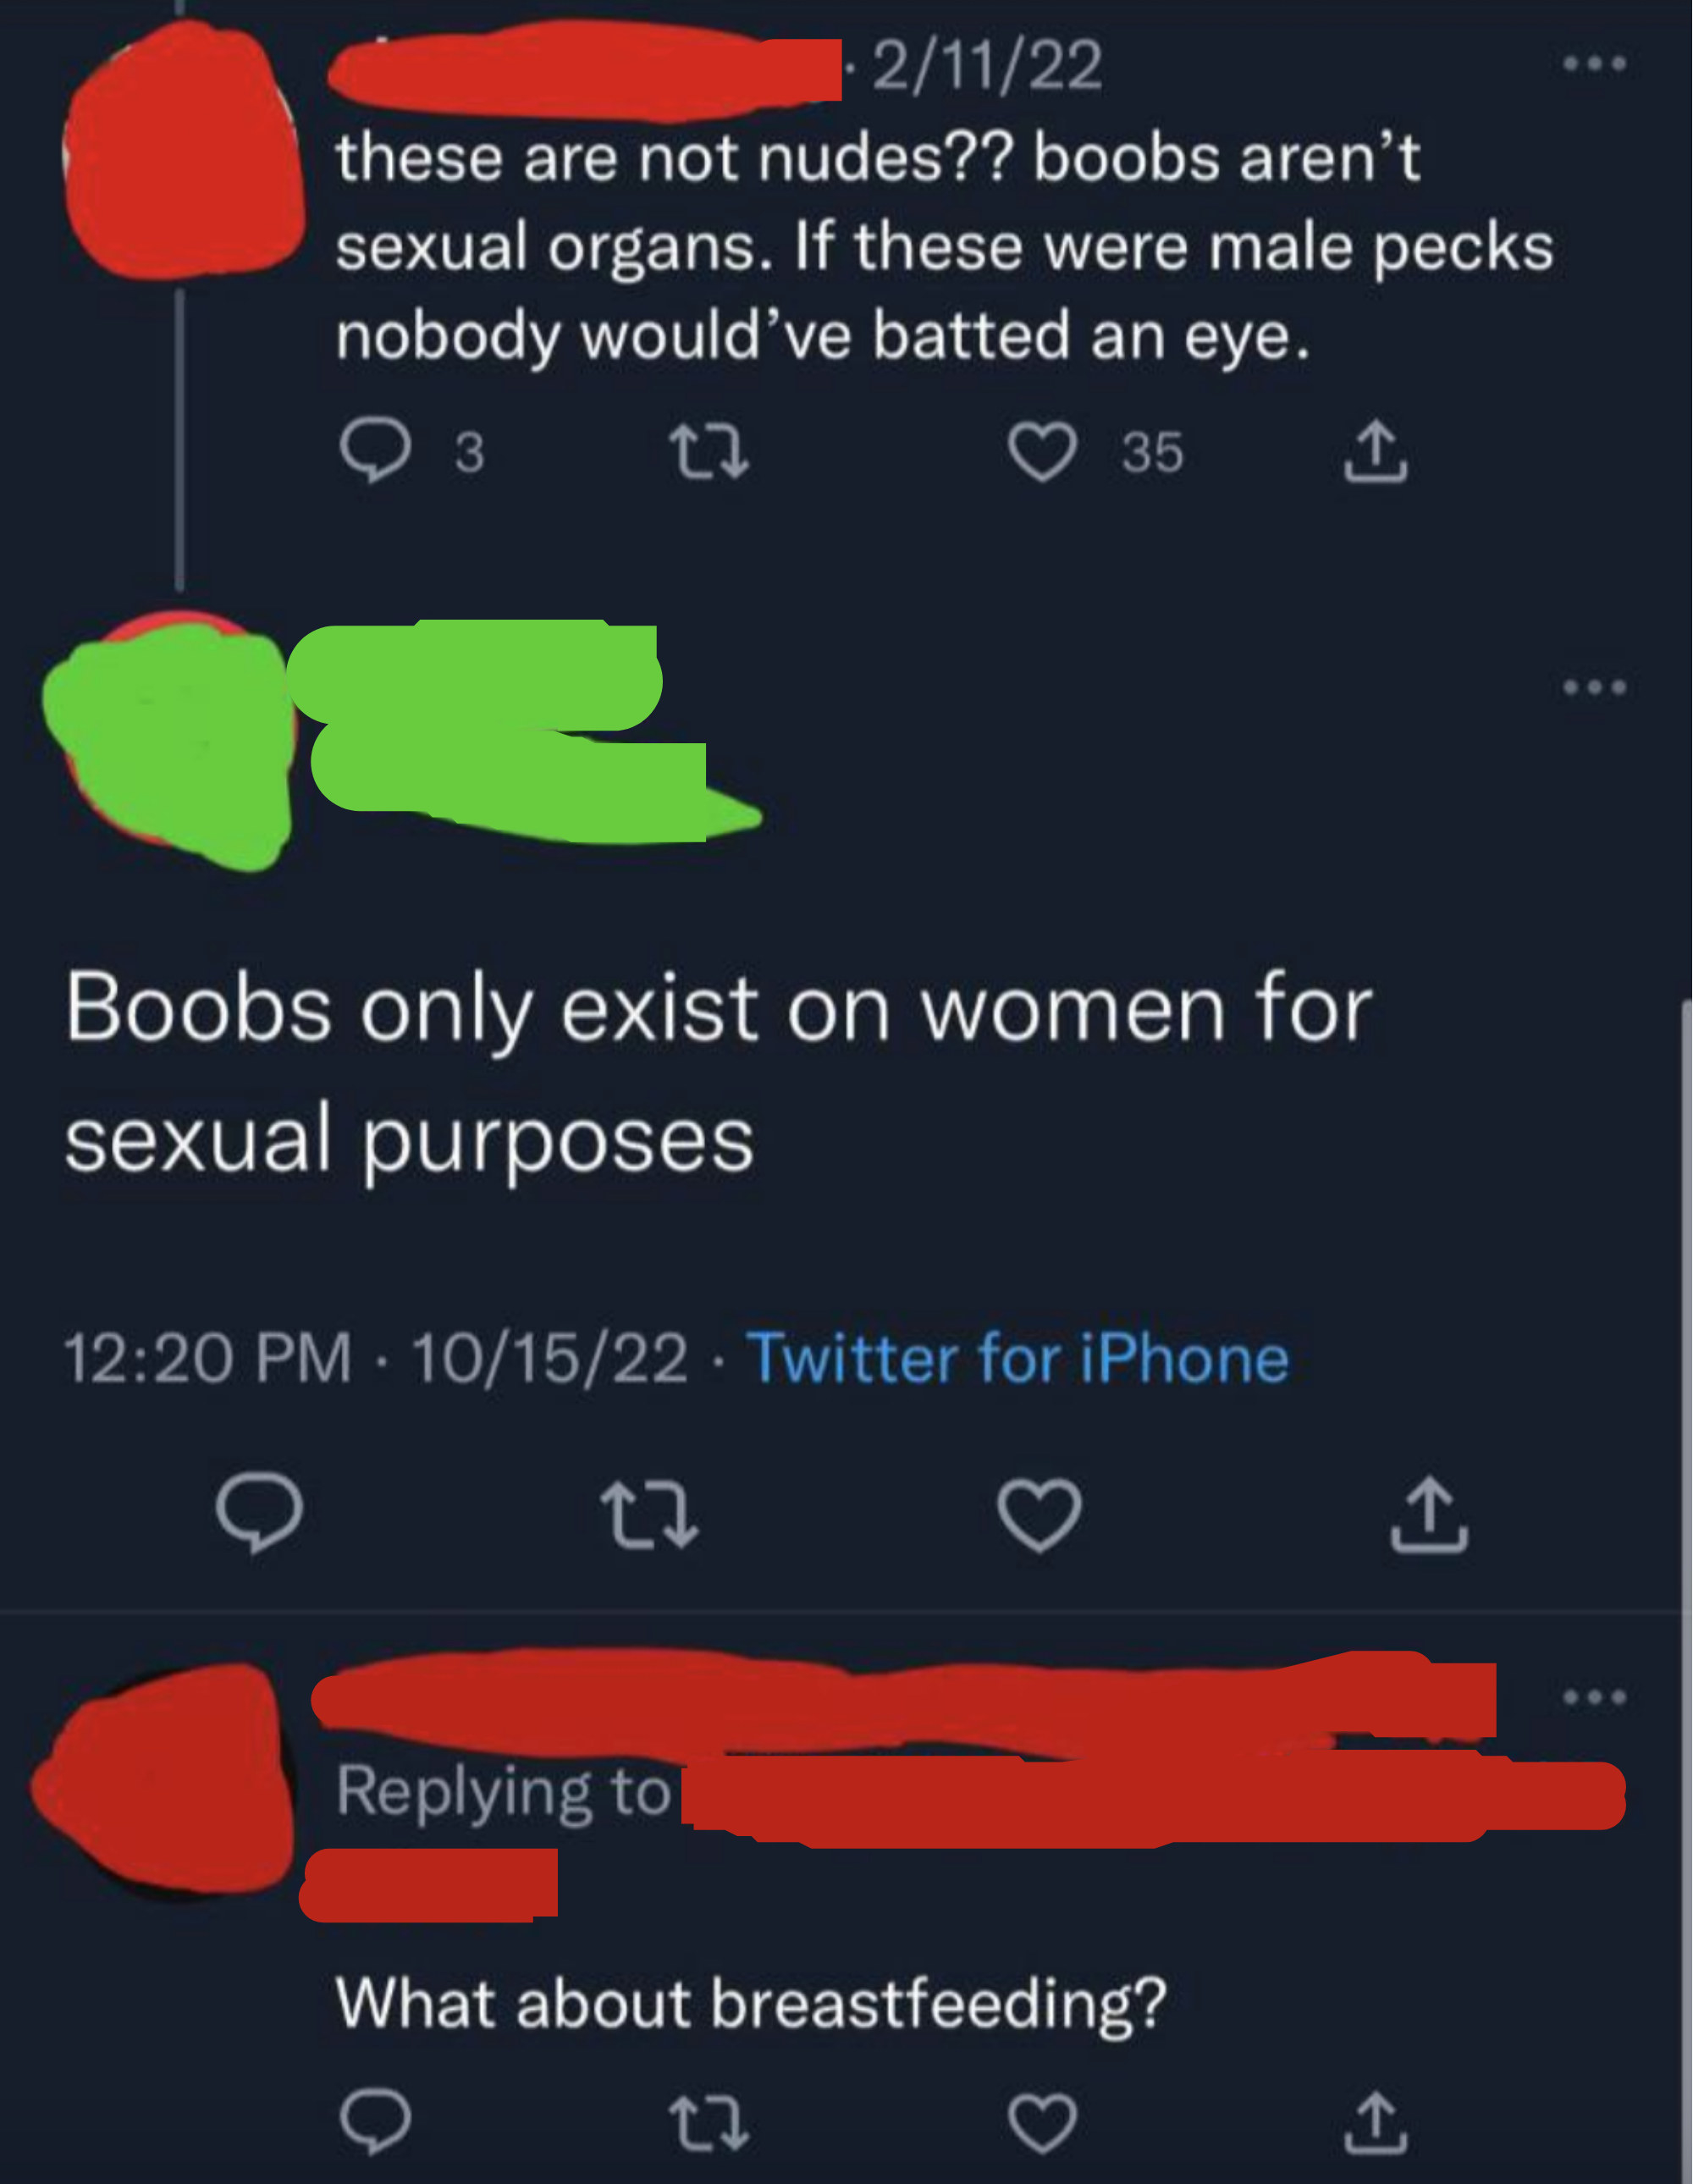 &quot;Boobs only exist on women for sexual purposes.&quot;